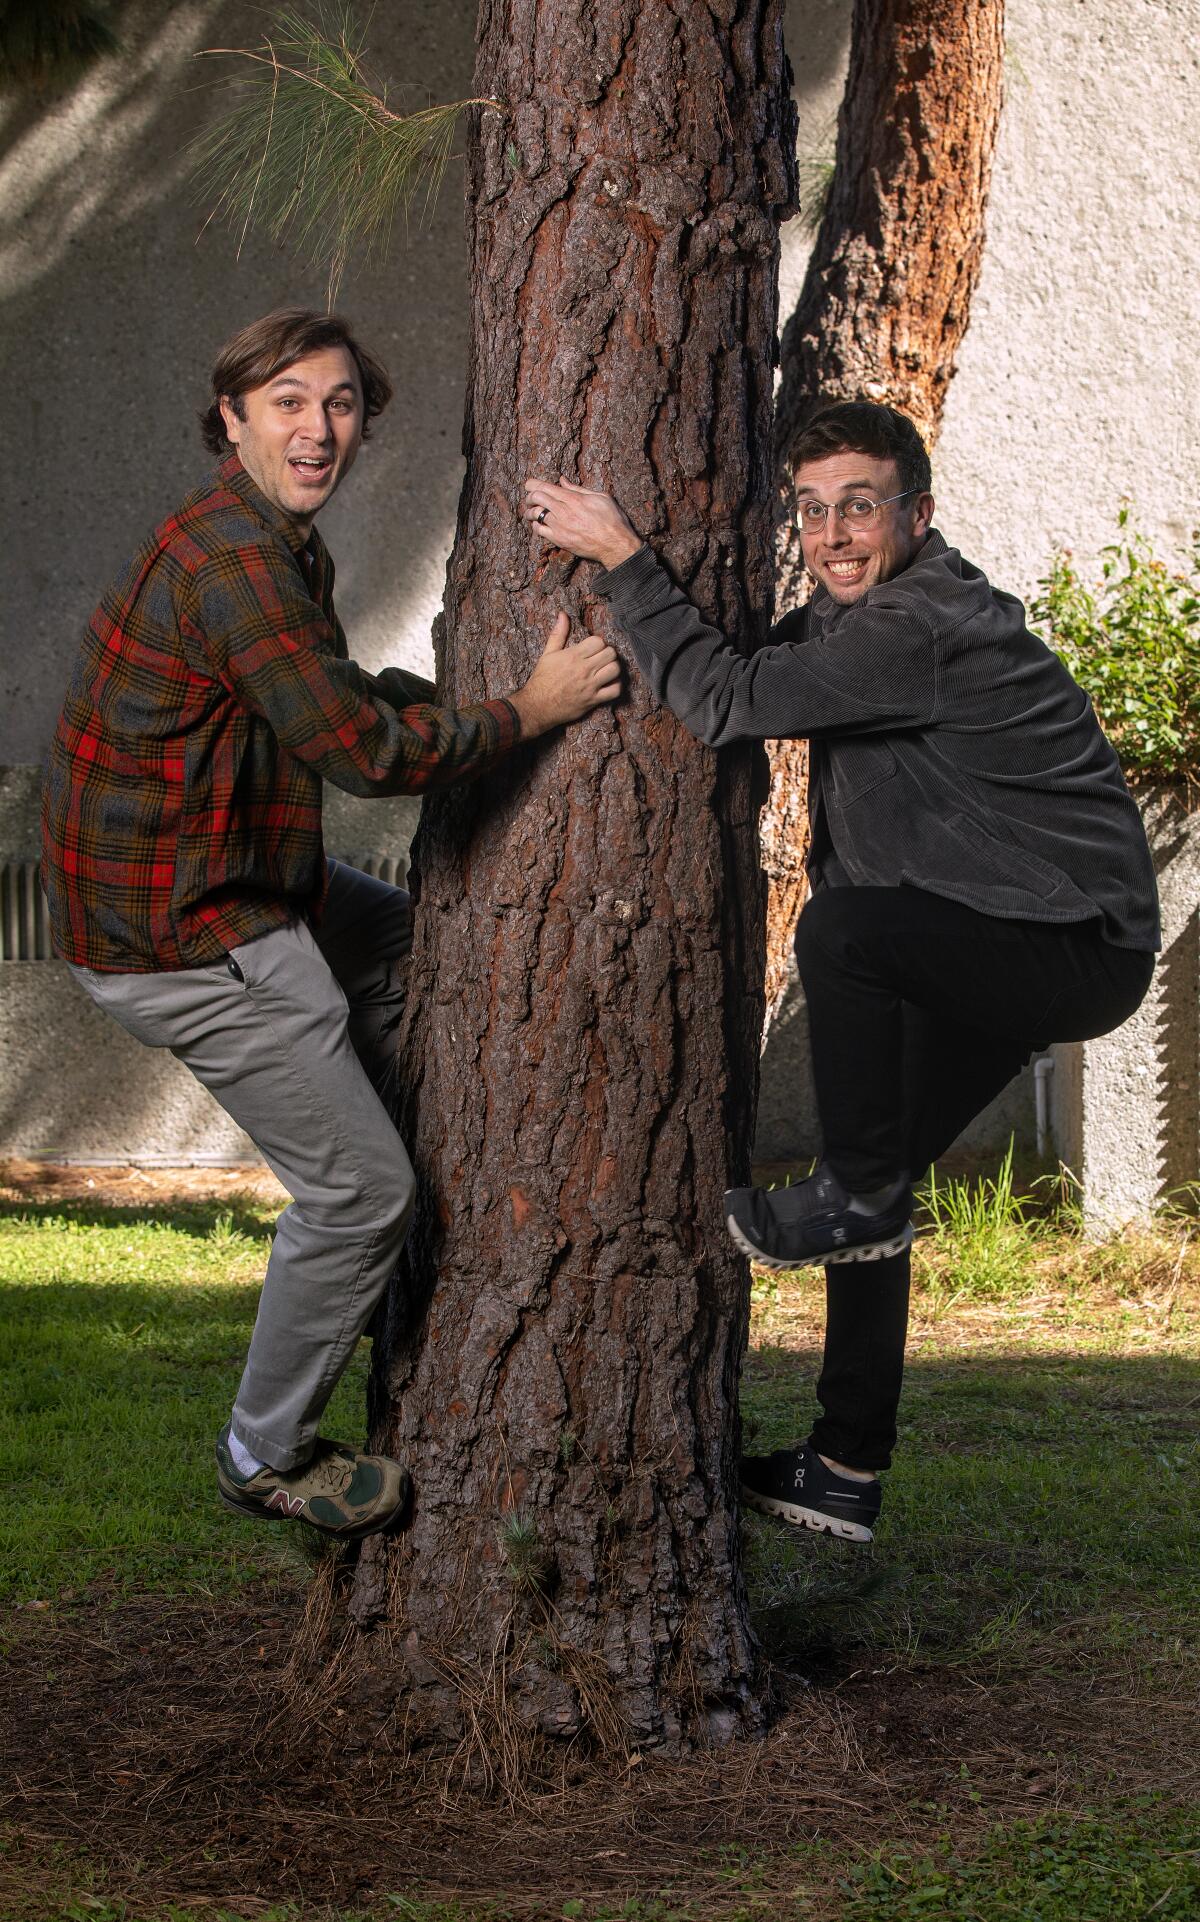 A man in a flannel shirt and one in a dark gray/green shirt make faces as they pretend to climb a tree in Barnsdall Art Park.